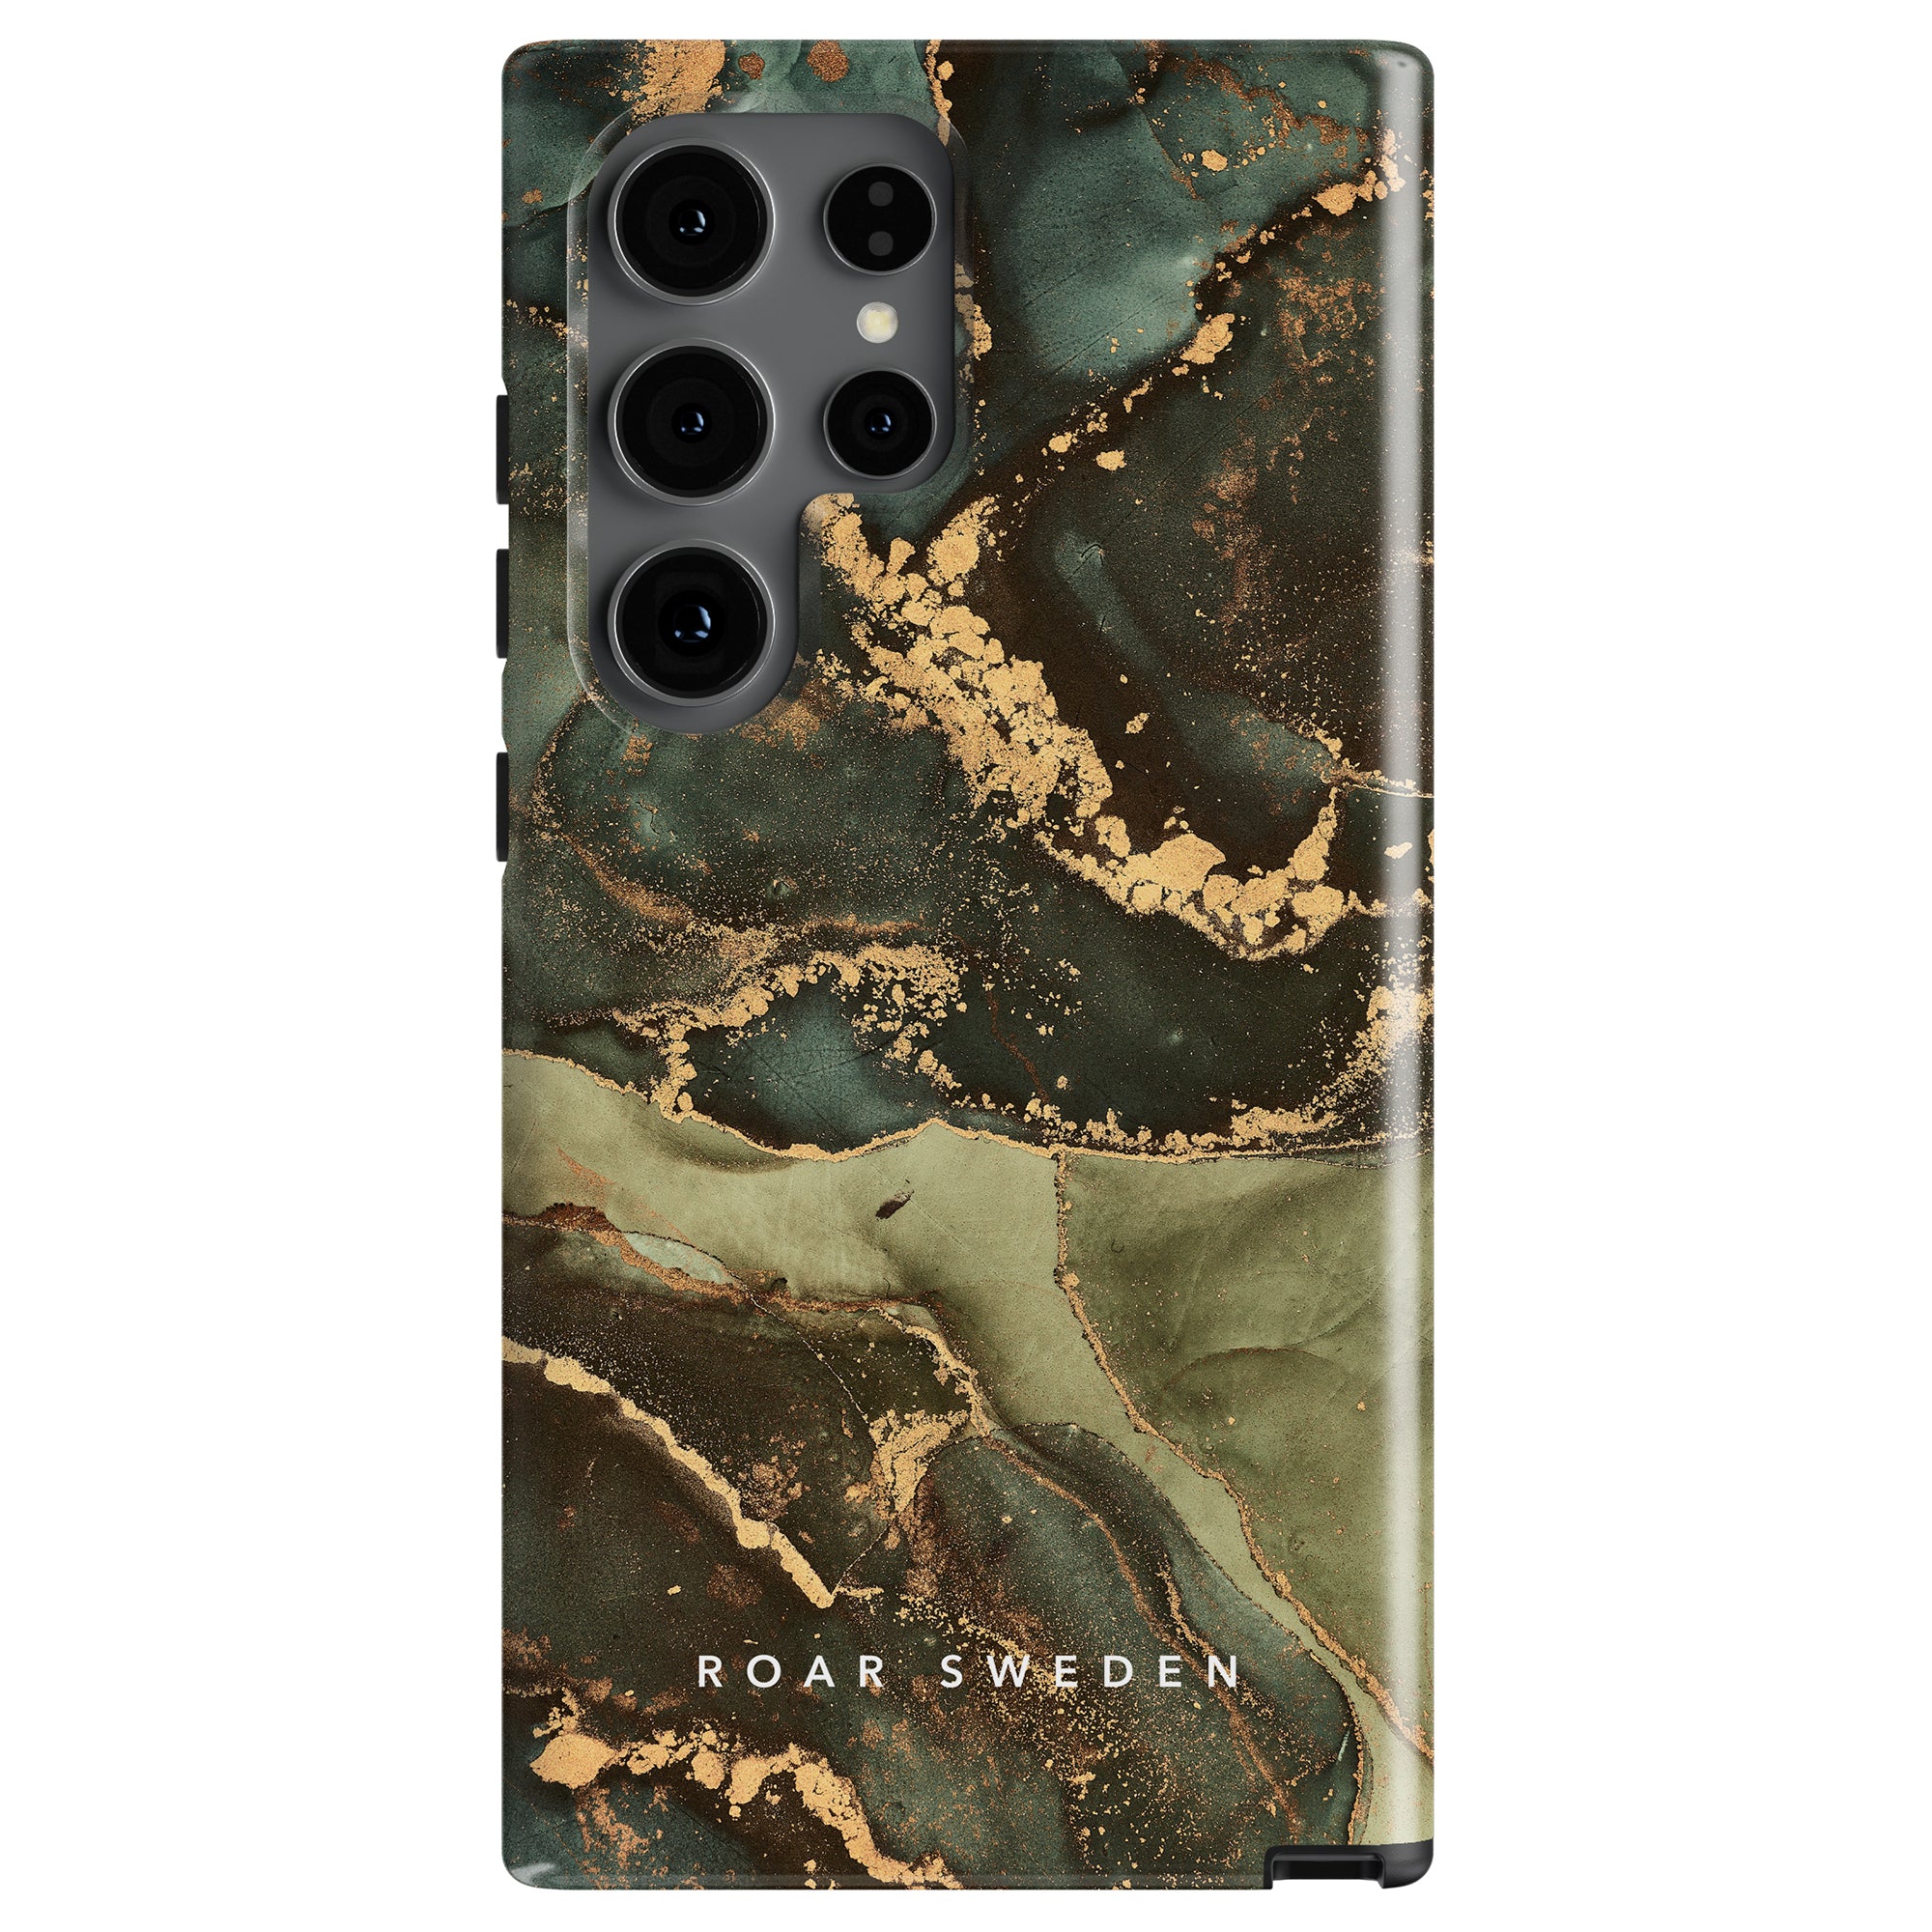 A smartphone with a dark green and black marbled design case, featuring accents of gold and the text "ROAR SWEDEN" at the bottom, embodies marmorliknande estetik. The Jade - Tough Case also ensures robust skydd.
